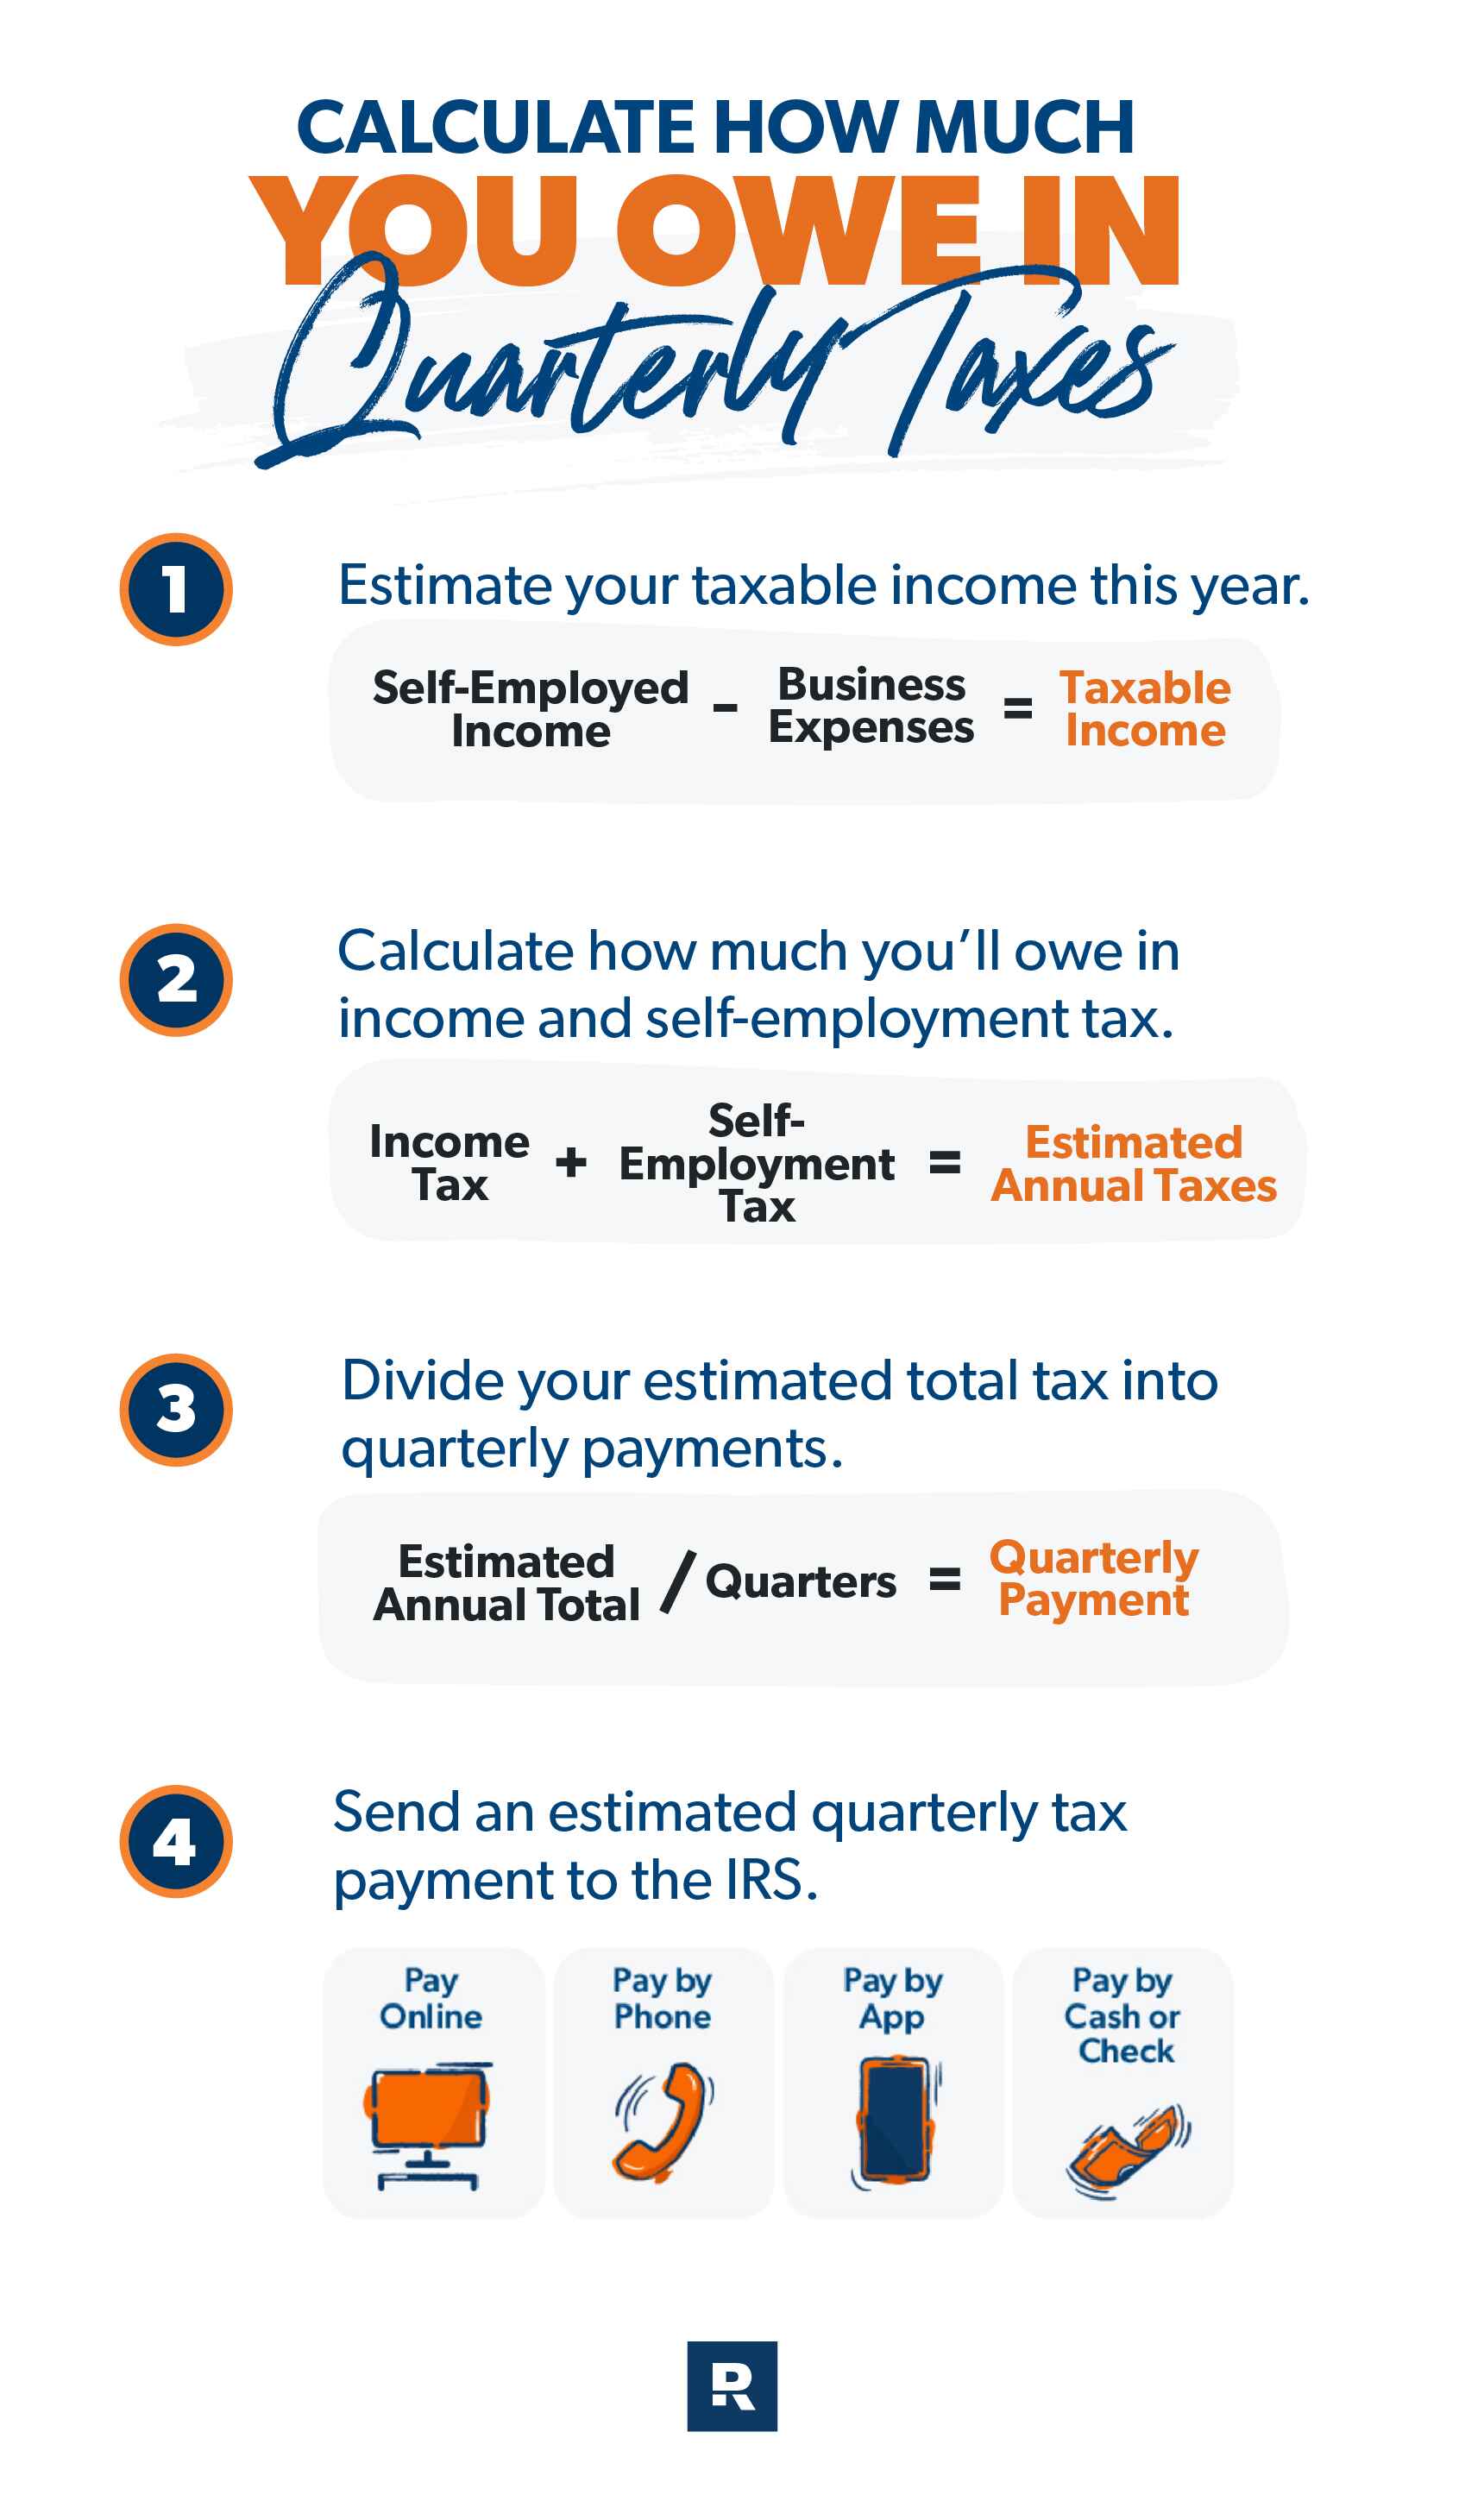 calculate how much you owe in quarterly taxes